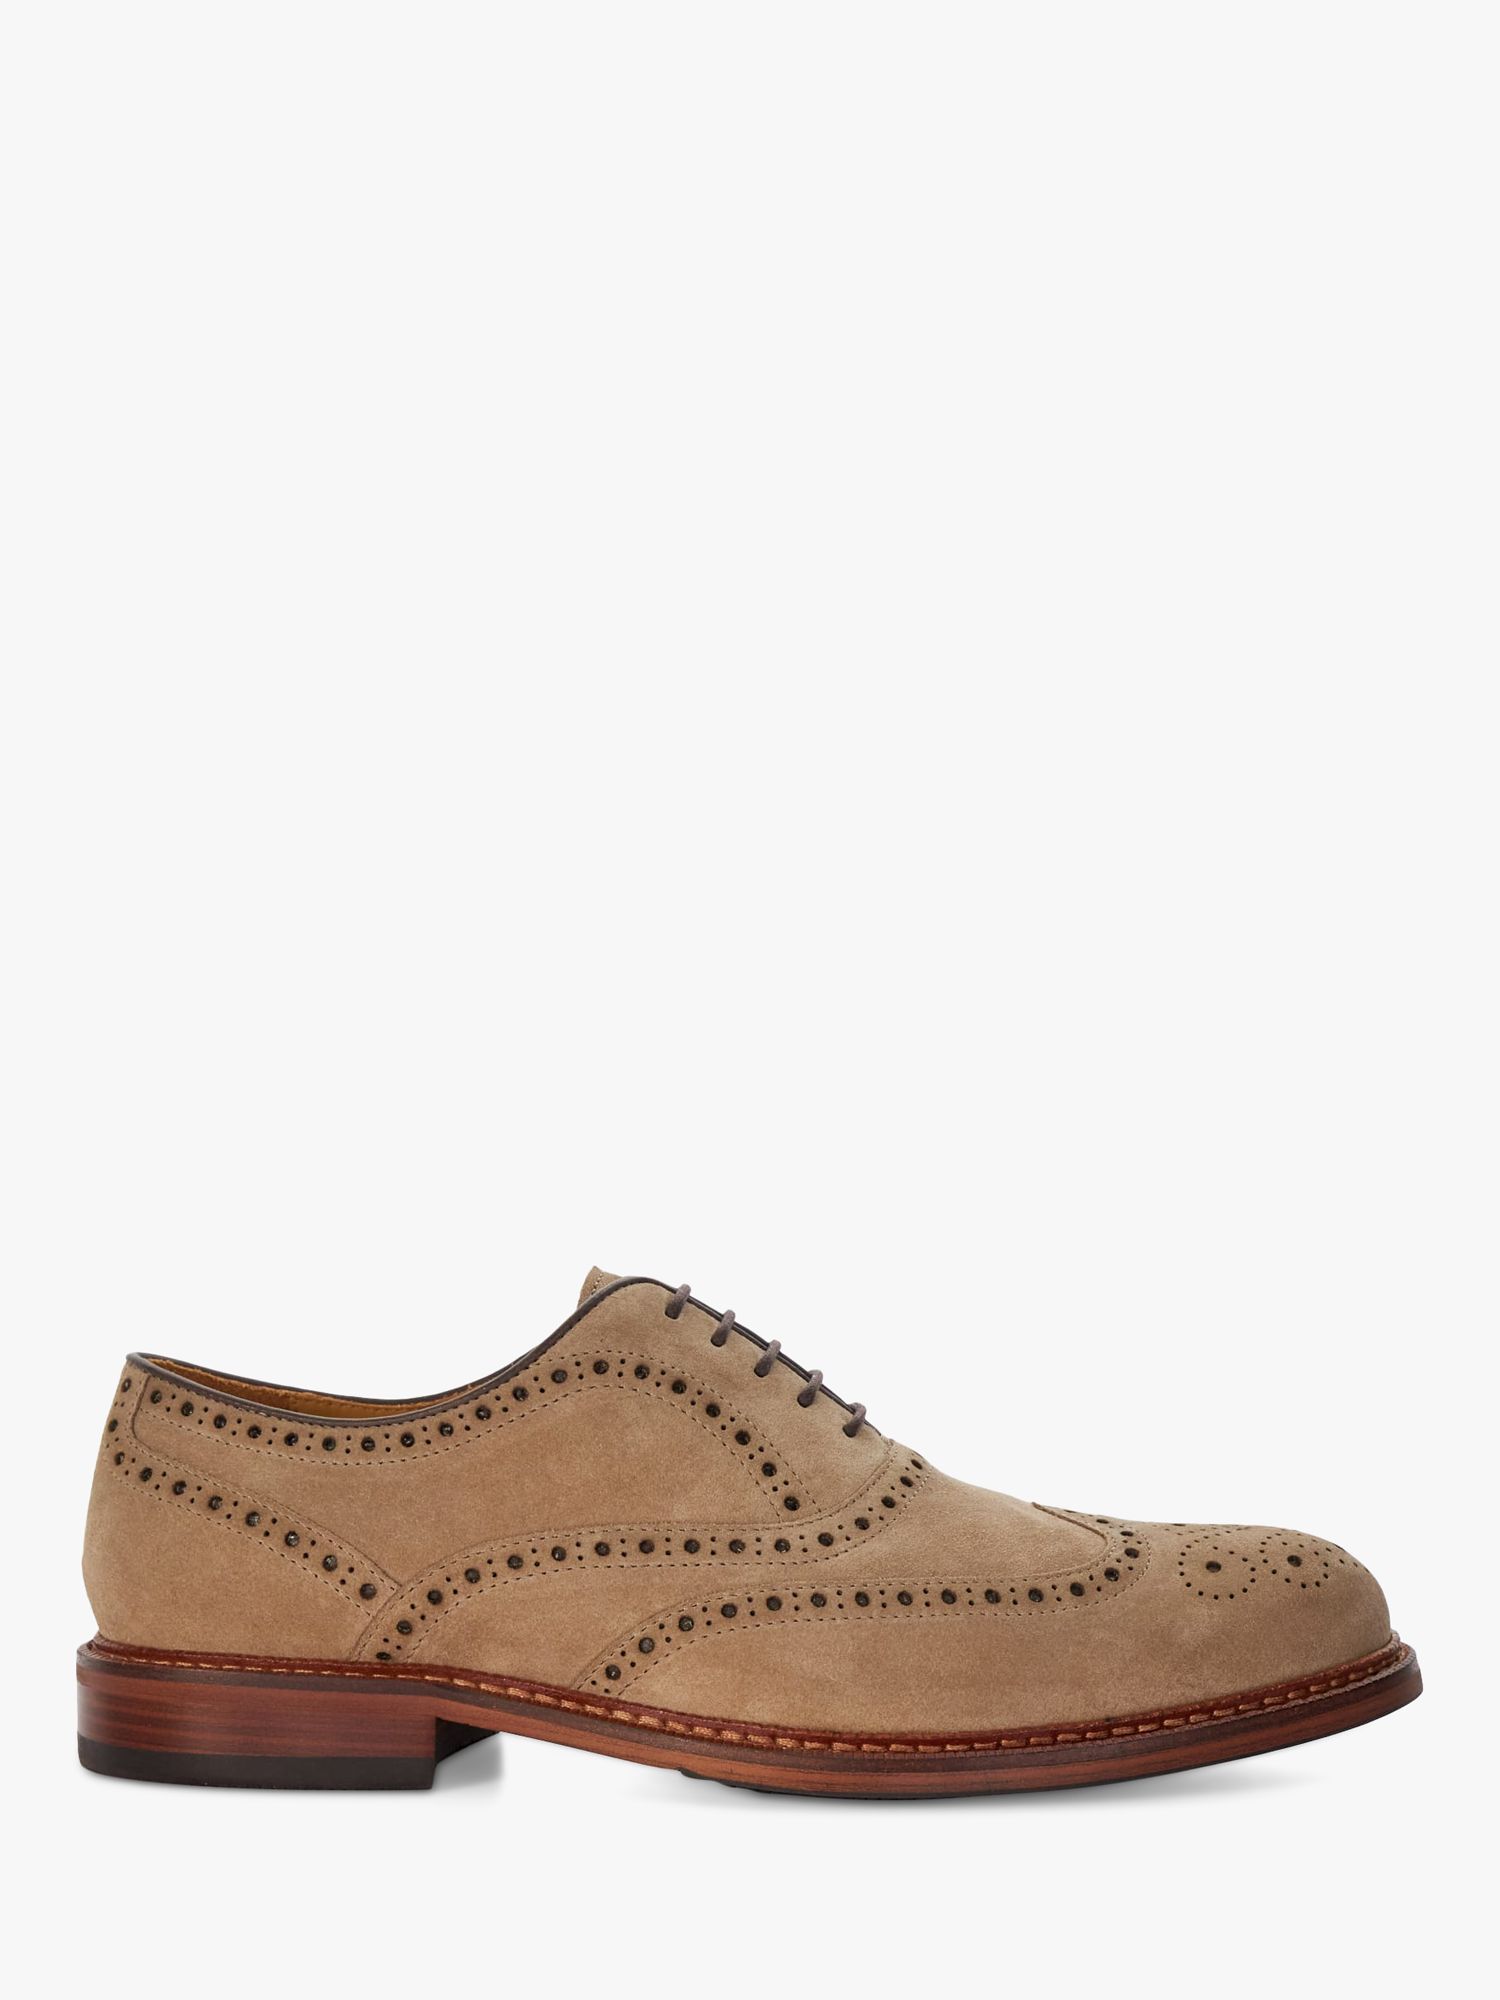 Dune Solihull Suede Oxford Brogue Shoes, Taupe, 6